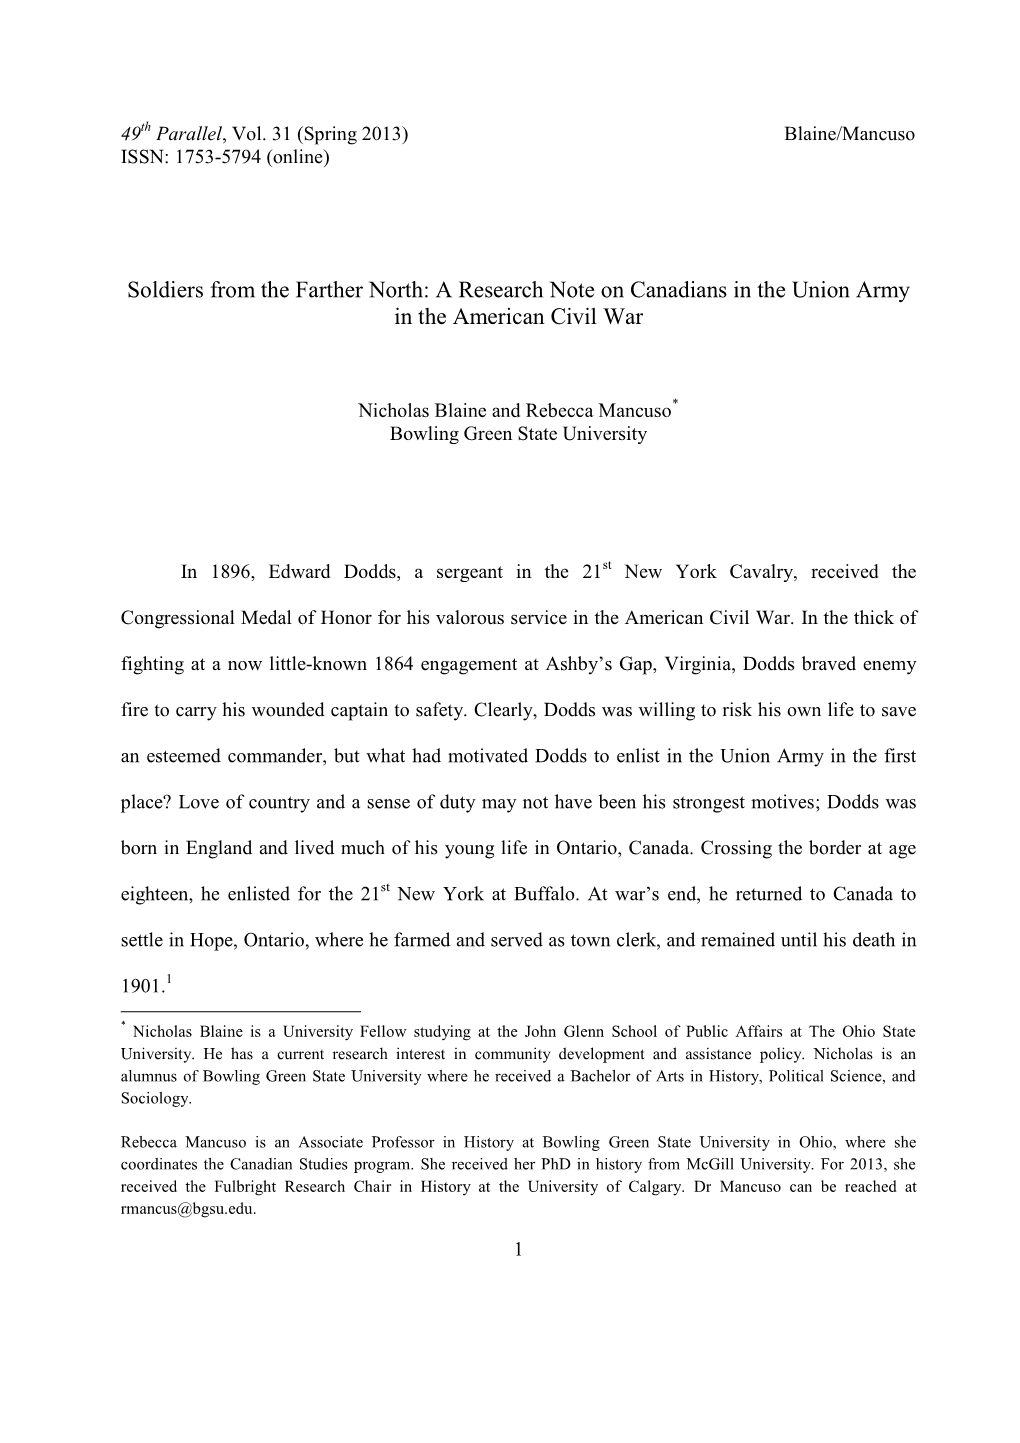 Soldiers from the Farther North: a Research Note on Canadians in the Union Army in the American Civil War